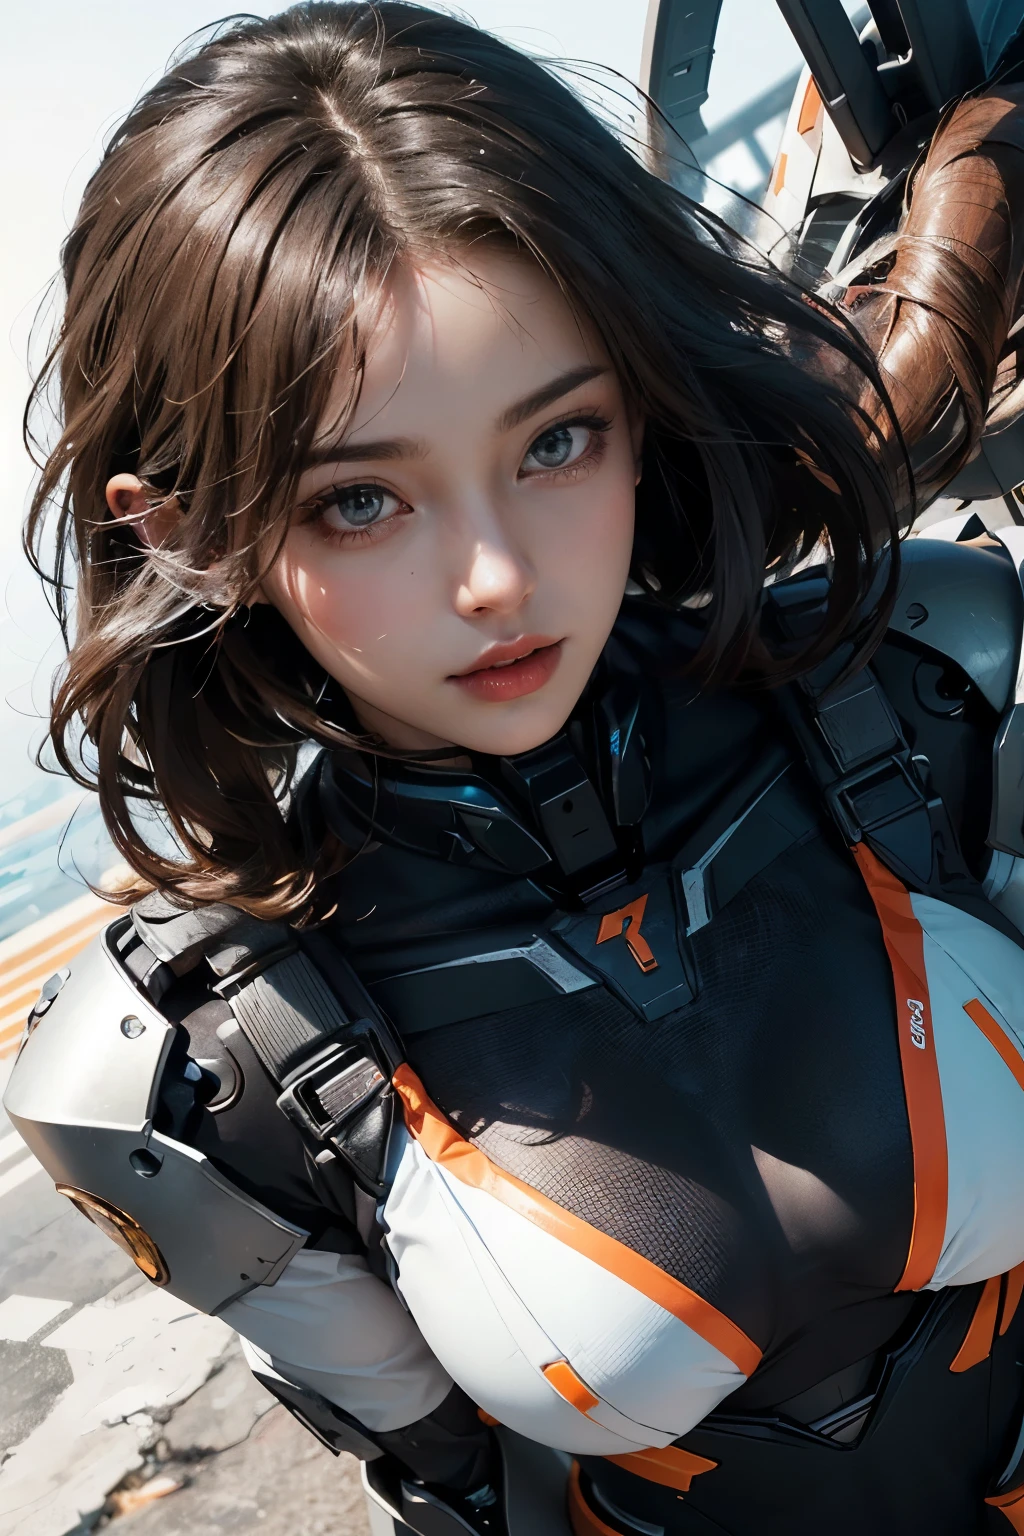 The basic color of the mecha is black masterpiece,Background white bright top quality, high quality, (Portrait of a real person) (future:1.1), (Orange Cyberpunk Suit), Soft Lighting, (Exquisite future), Sergeant personnel soldier sniper soldier mecha costume beautiful and beautiful, Ultra Detailed, Amazing composition, floating, Depth of Field, (Plain white wallpaper), (Beautiful detail background), Beautiful hair details, Dramatic Lighting, Gogeta, mechanical,best quality,Ultra-high resolution,Photorealistic,,(Hair blowing in the wind),((The angle from which you shot from directly above)),(Confident expression),(Looks arrogant)(Fashion pose),((Thunder)),(it&#39;s very windy),(Hair blowing in the strong wind),wet, go out, 